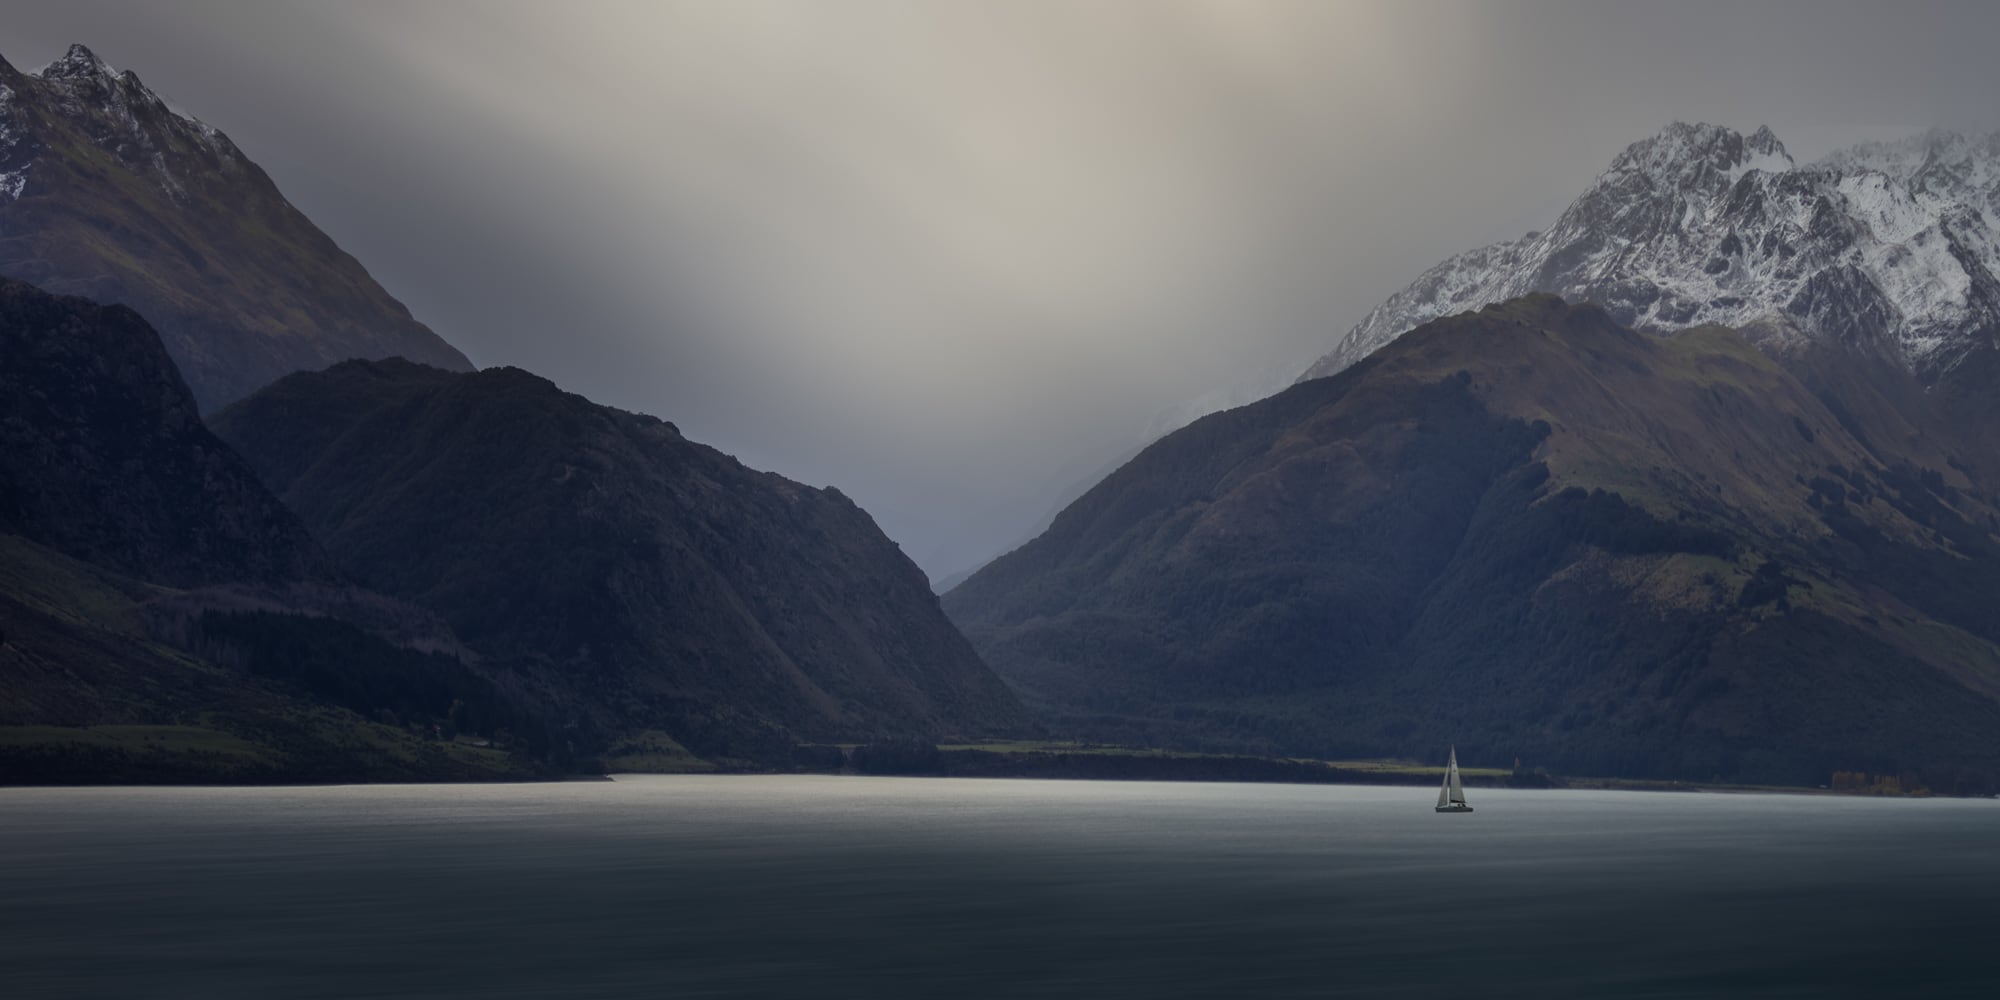 A lone sailboat on a calm lake in Queenstown, New Zealand, with towering, snow-capped mountains under a soft, overcast sky.